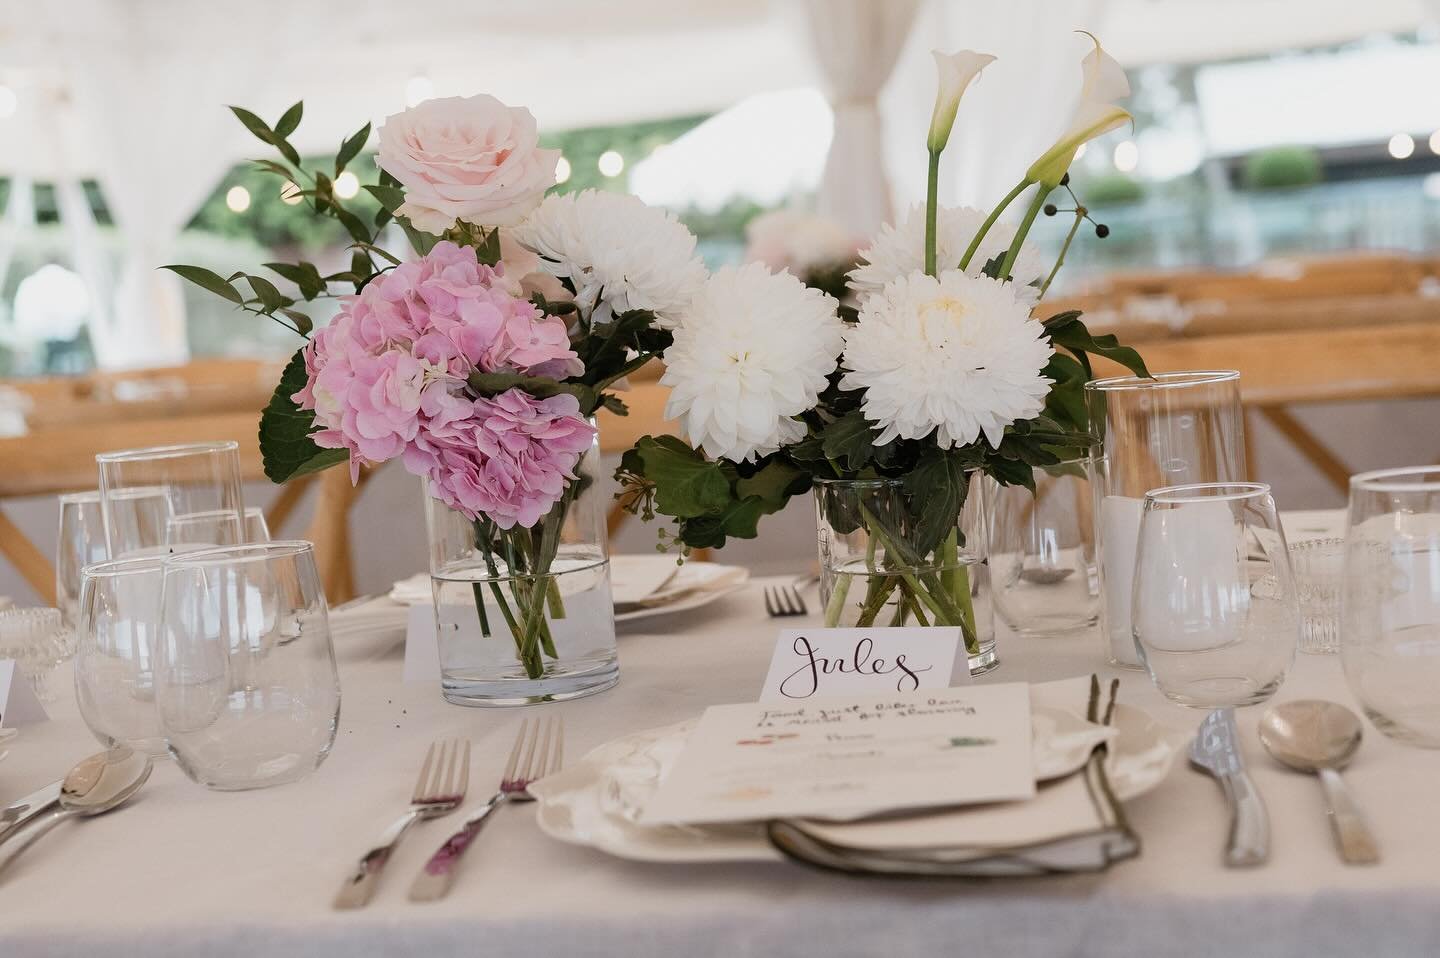 ✨A Reception to Remember ✨✨

Attention all brides-to-be! Are you ready to turn your wedding reception into a vision of pure elegance and enchantment? It&rsquo;s time to set the tables, arrange the flowers, add candlelight, and sprinkle those finer de